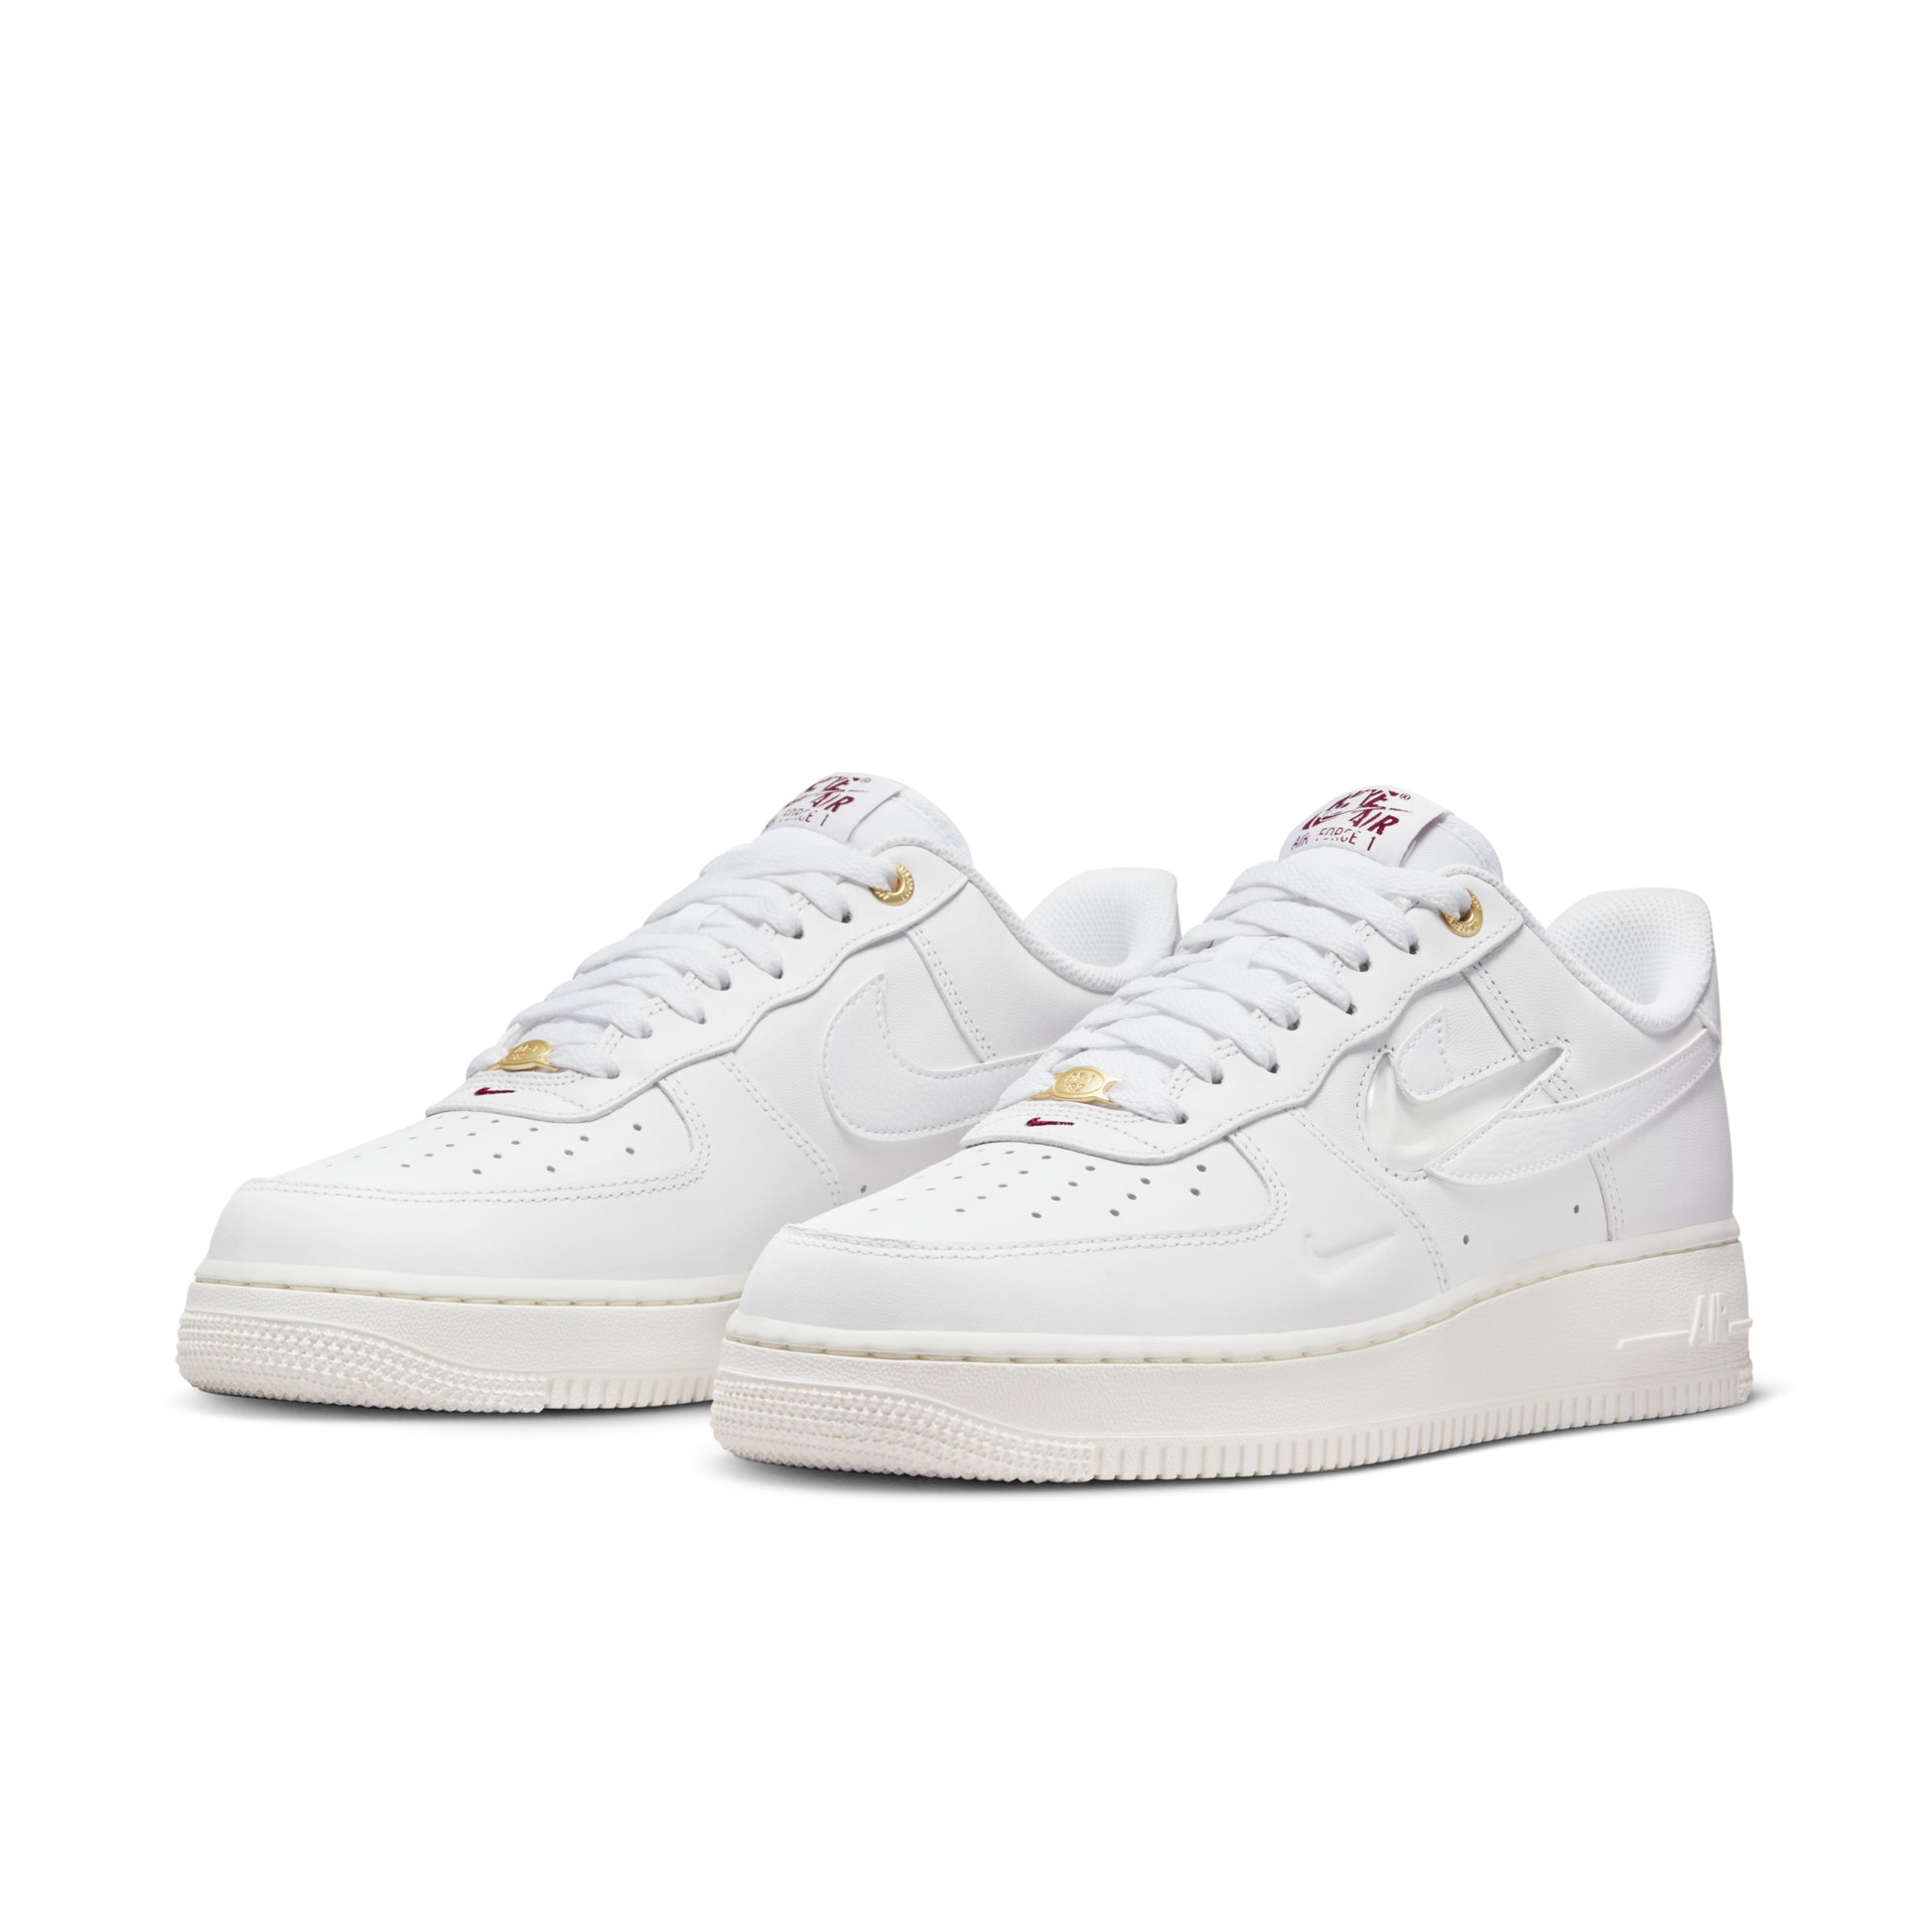 Nike Air Force 1 Low '07 Join Forces Sail